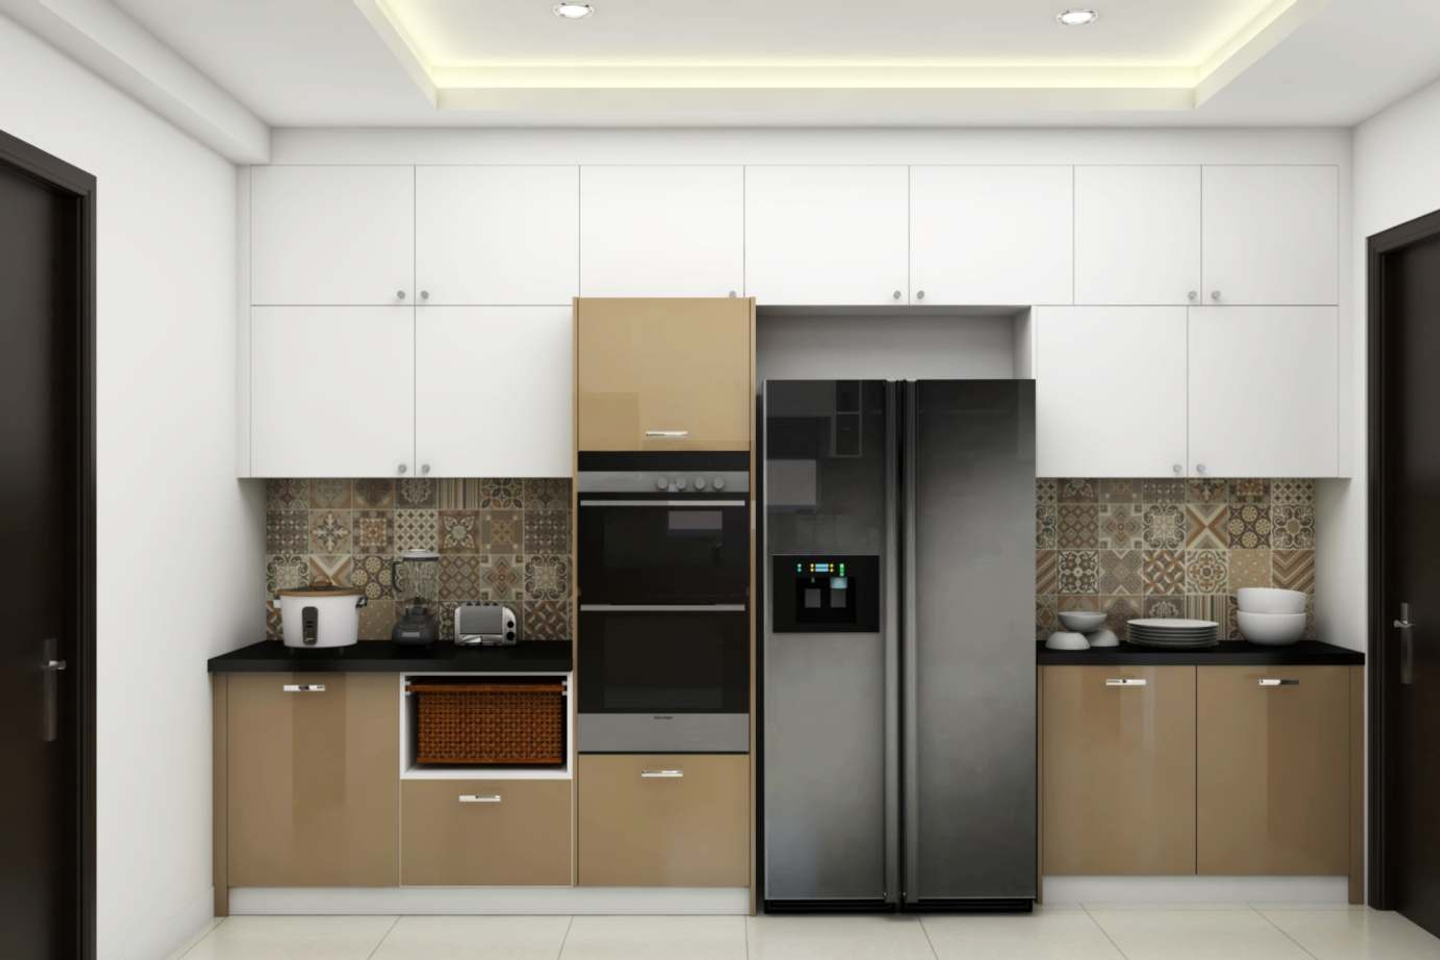 Modern Parallel Kitchen Design In Light Brown And White